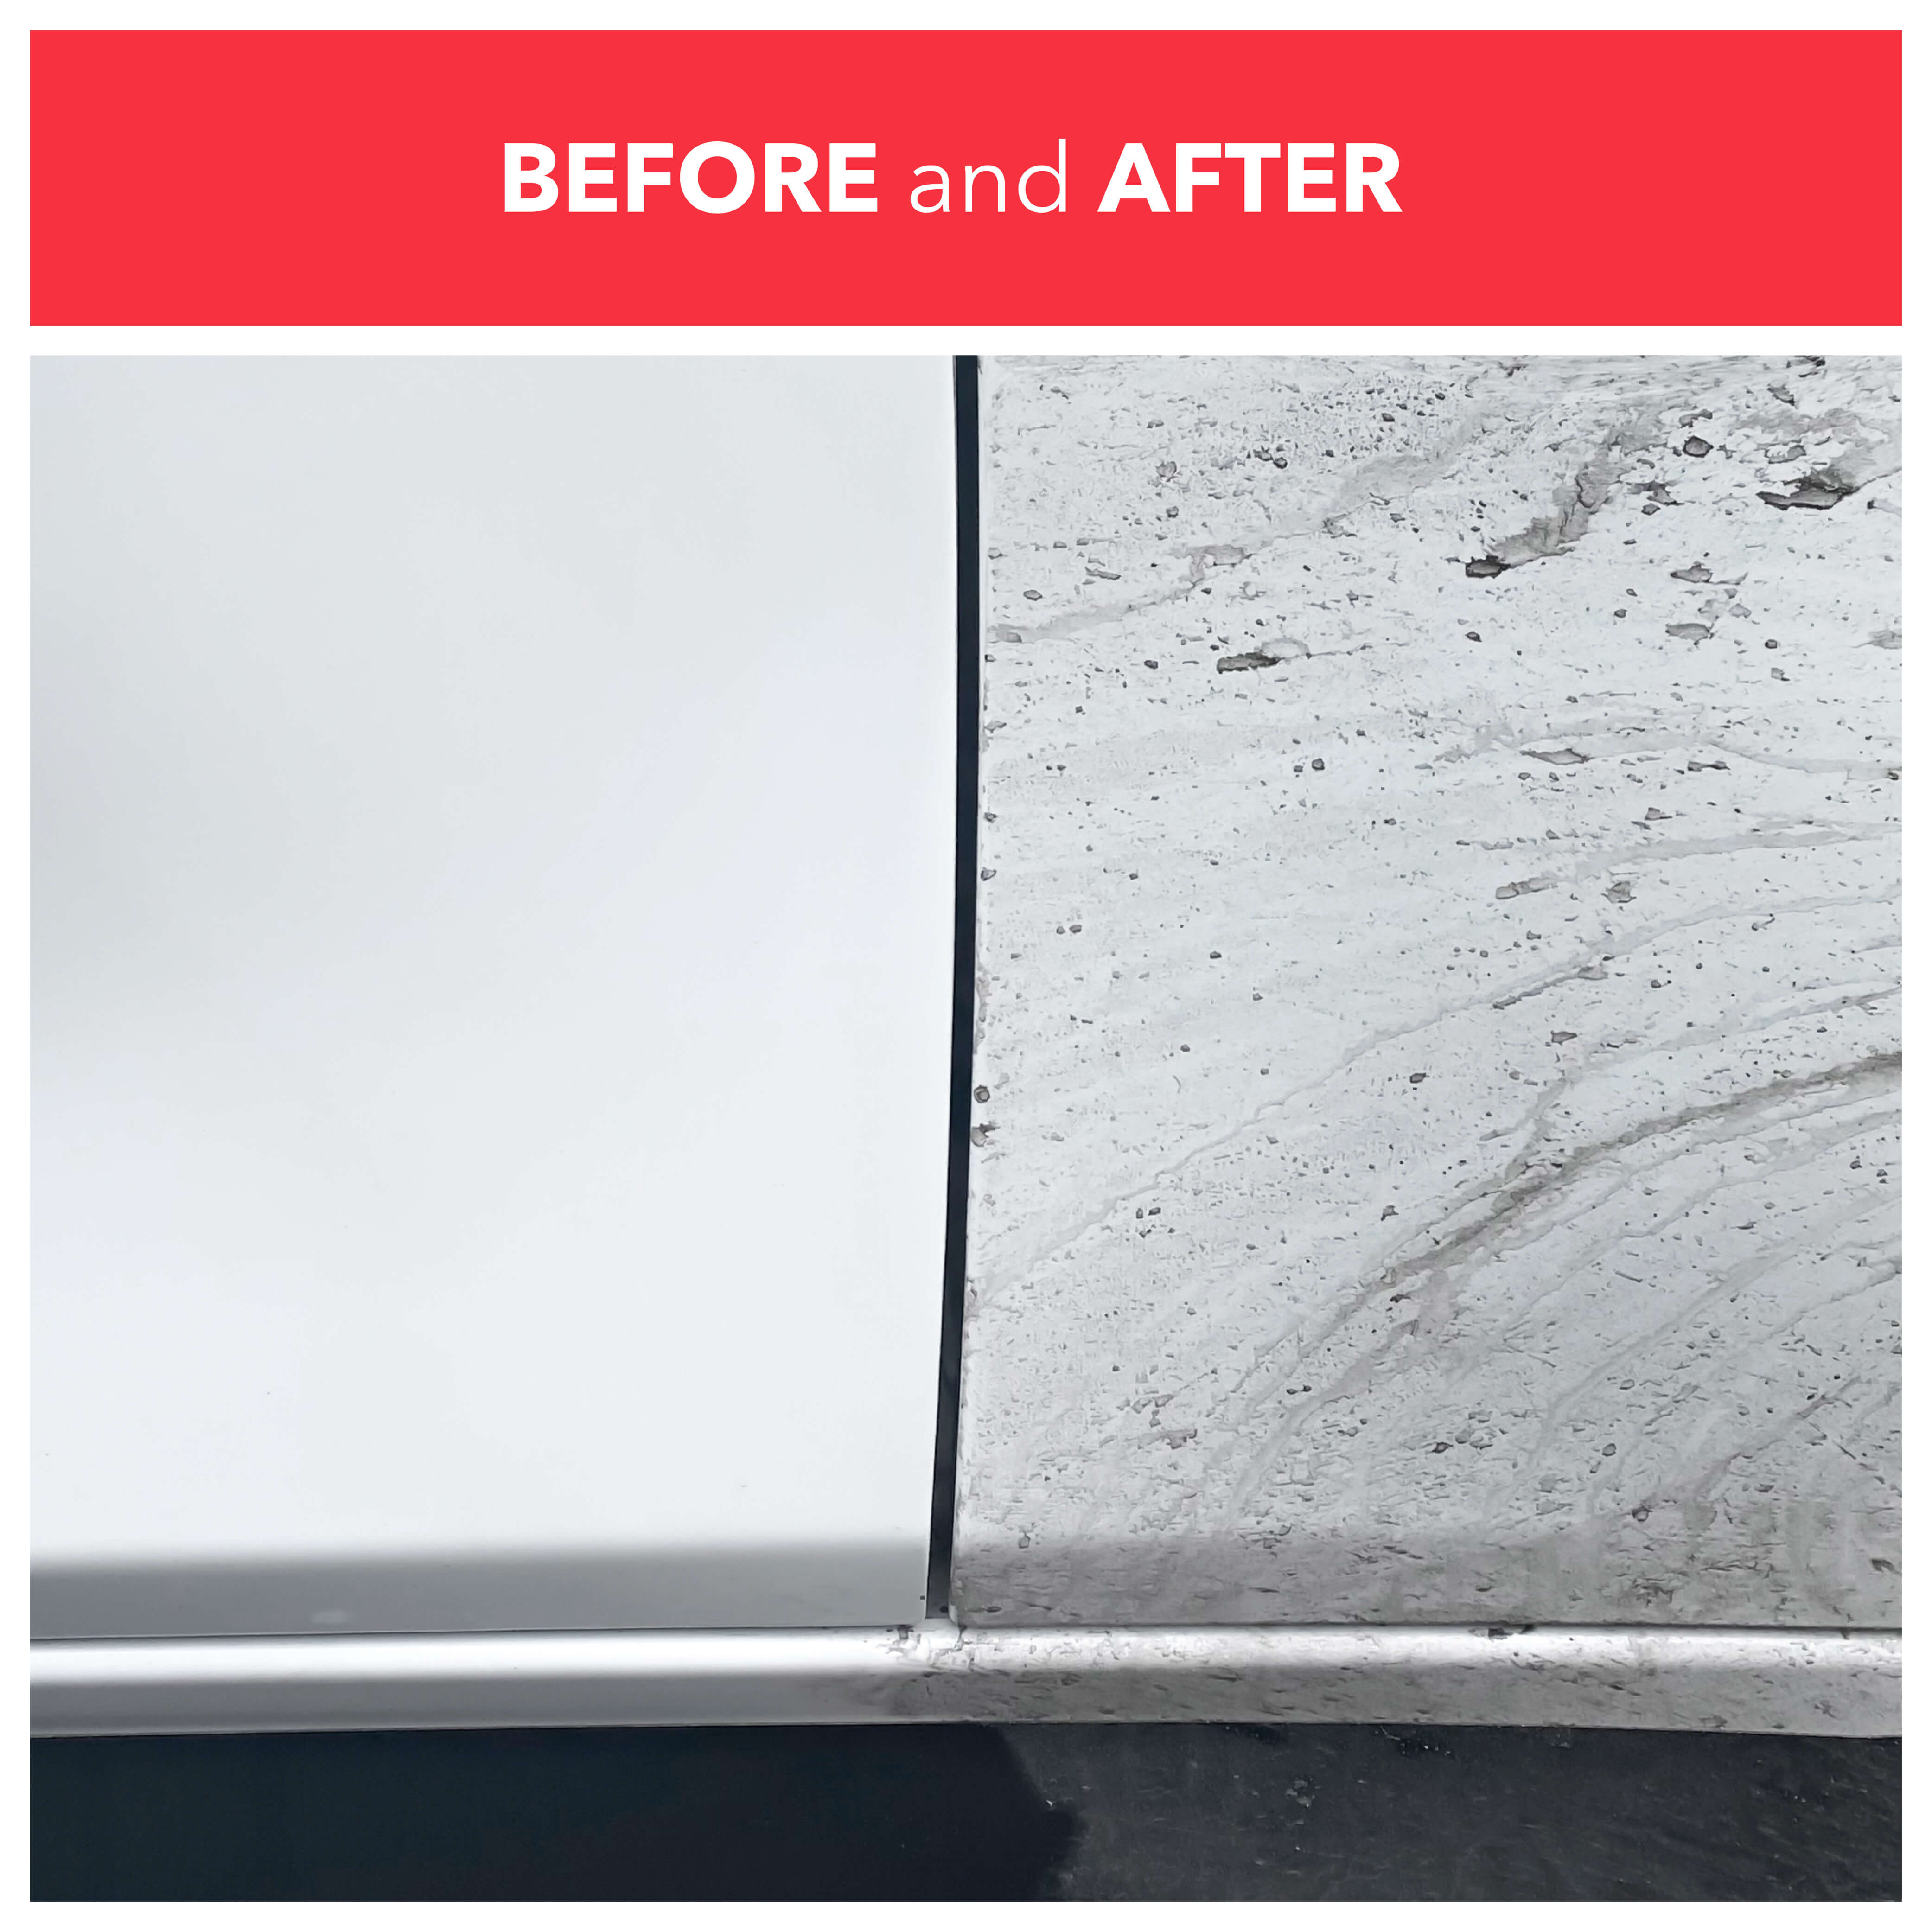 Before and after using Caravan Cleaner